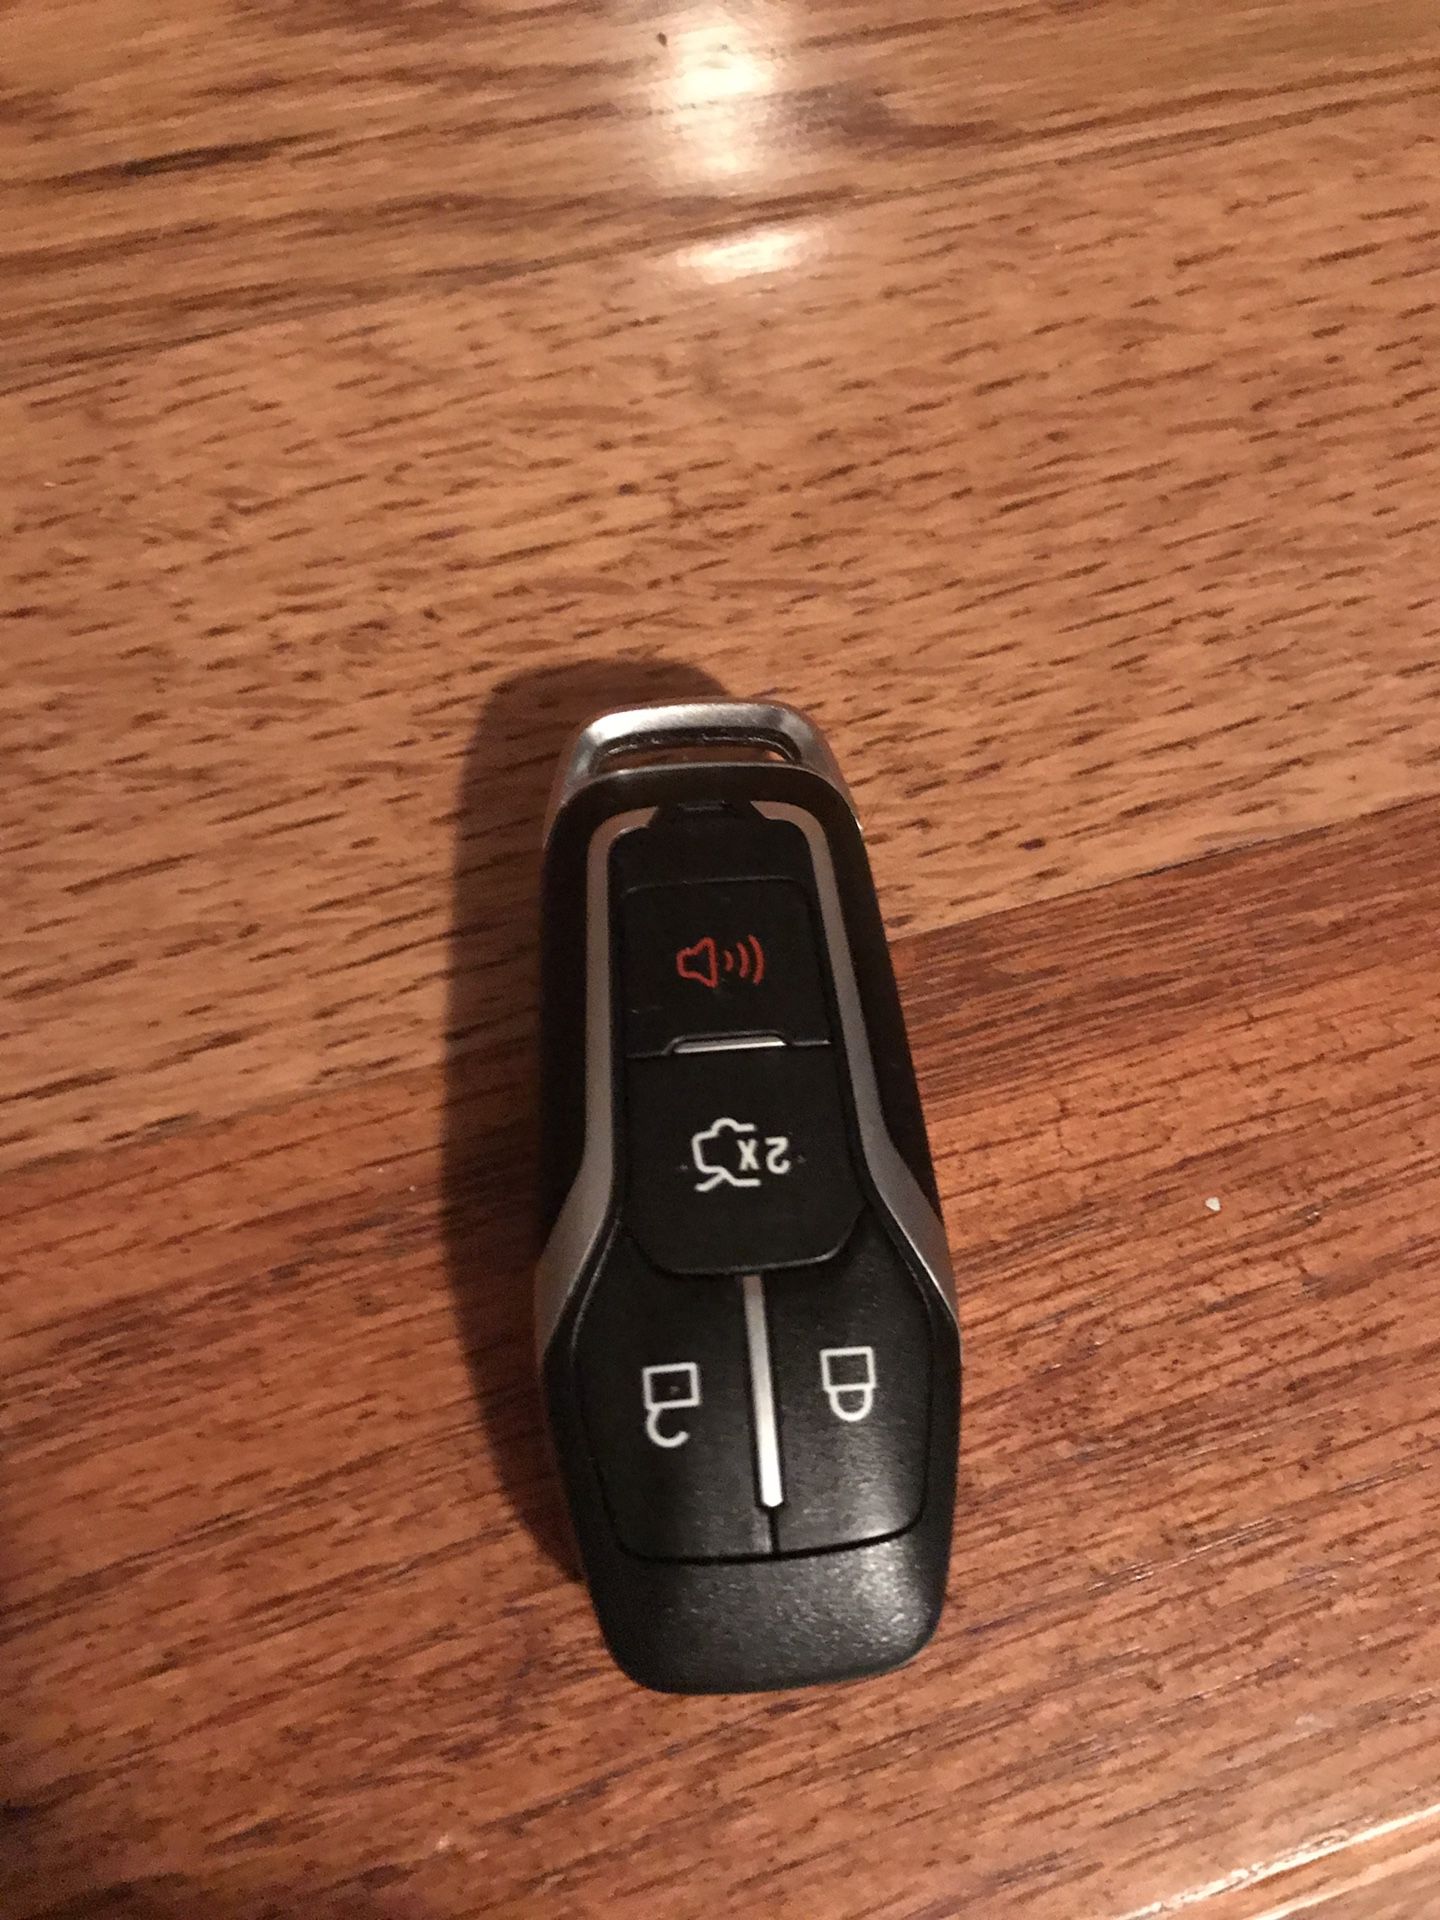 2017 Ford Mustang GT Key Fob